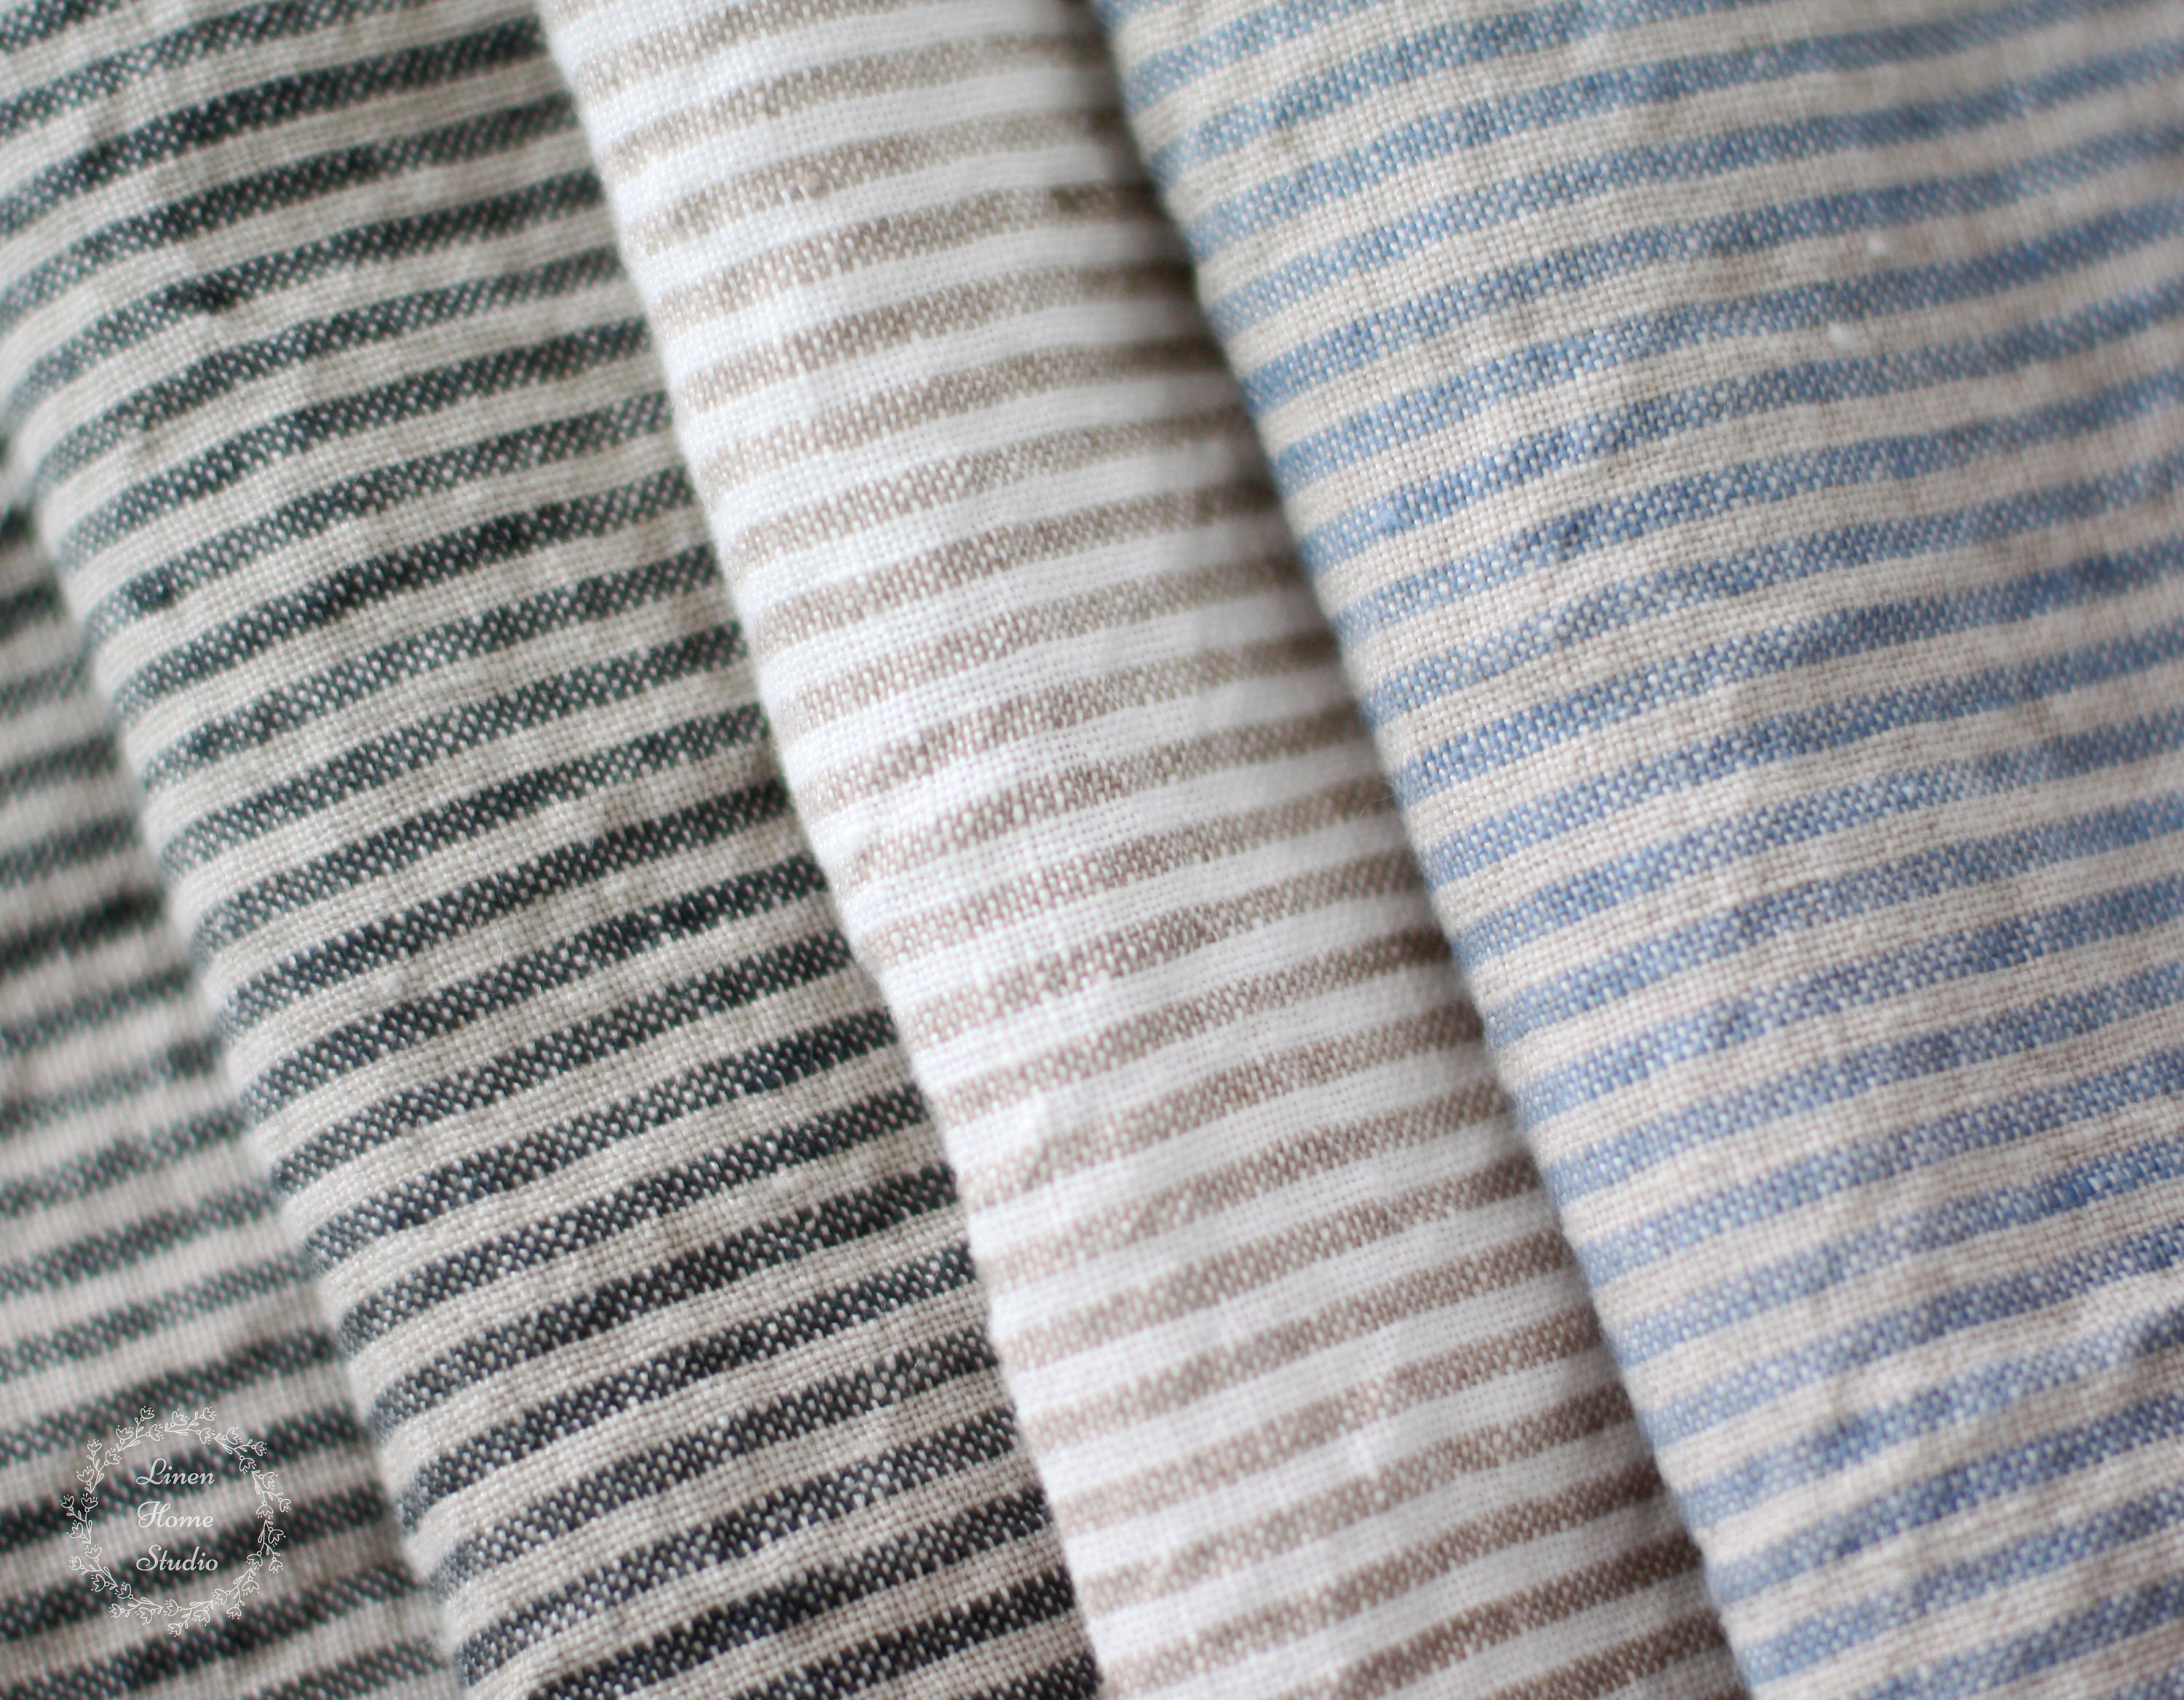 Striped Linen Fabric Natural Gray Blue White Stonewashed Vintage Looking  100% Linen Fabric by the Yard Width of Stripes 3mm or 1.5mm 